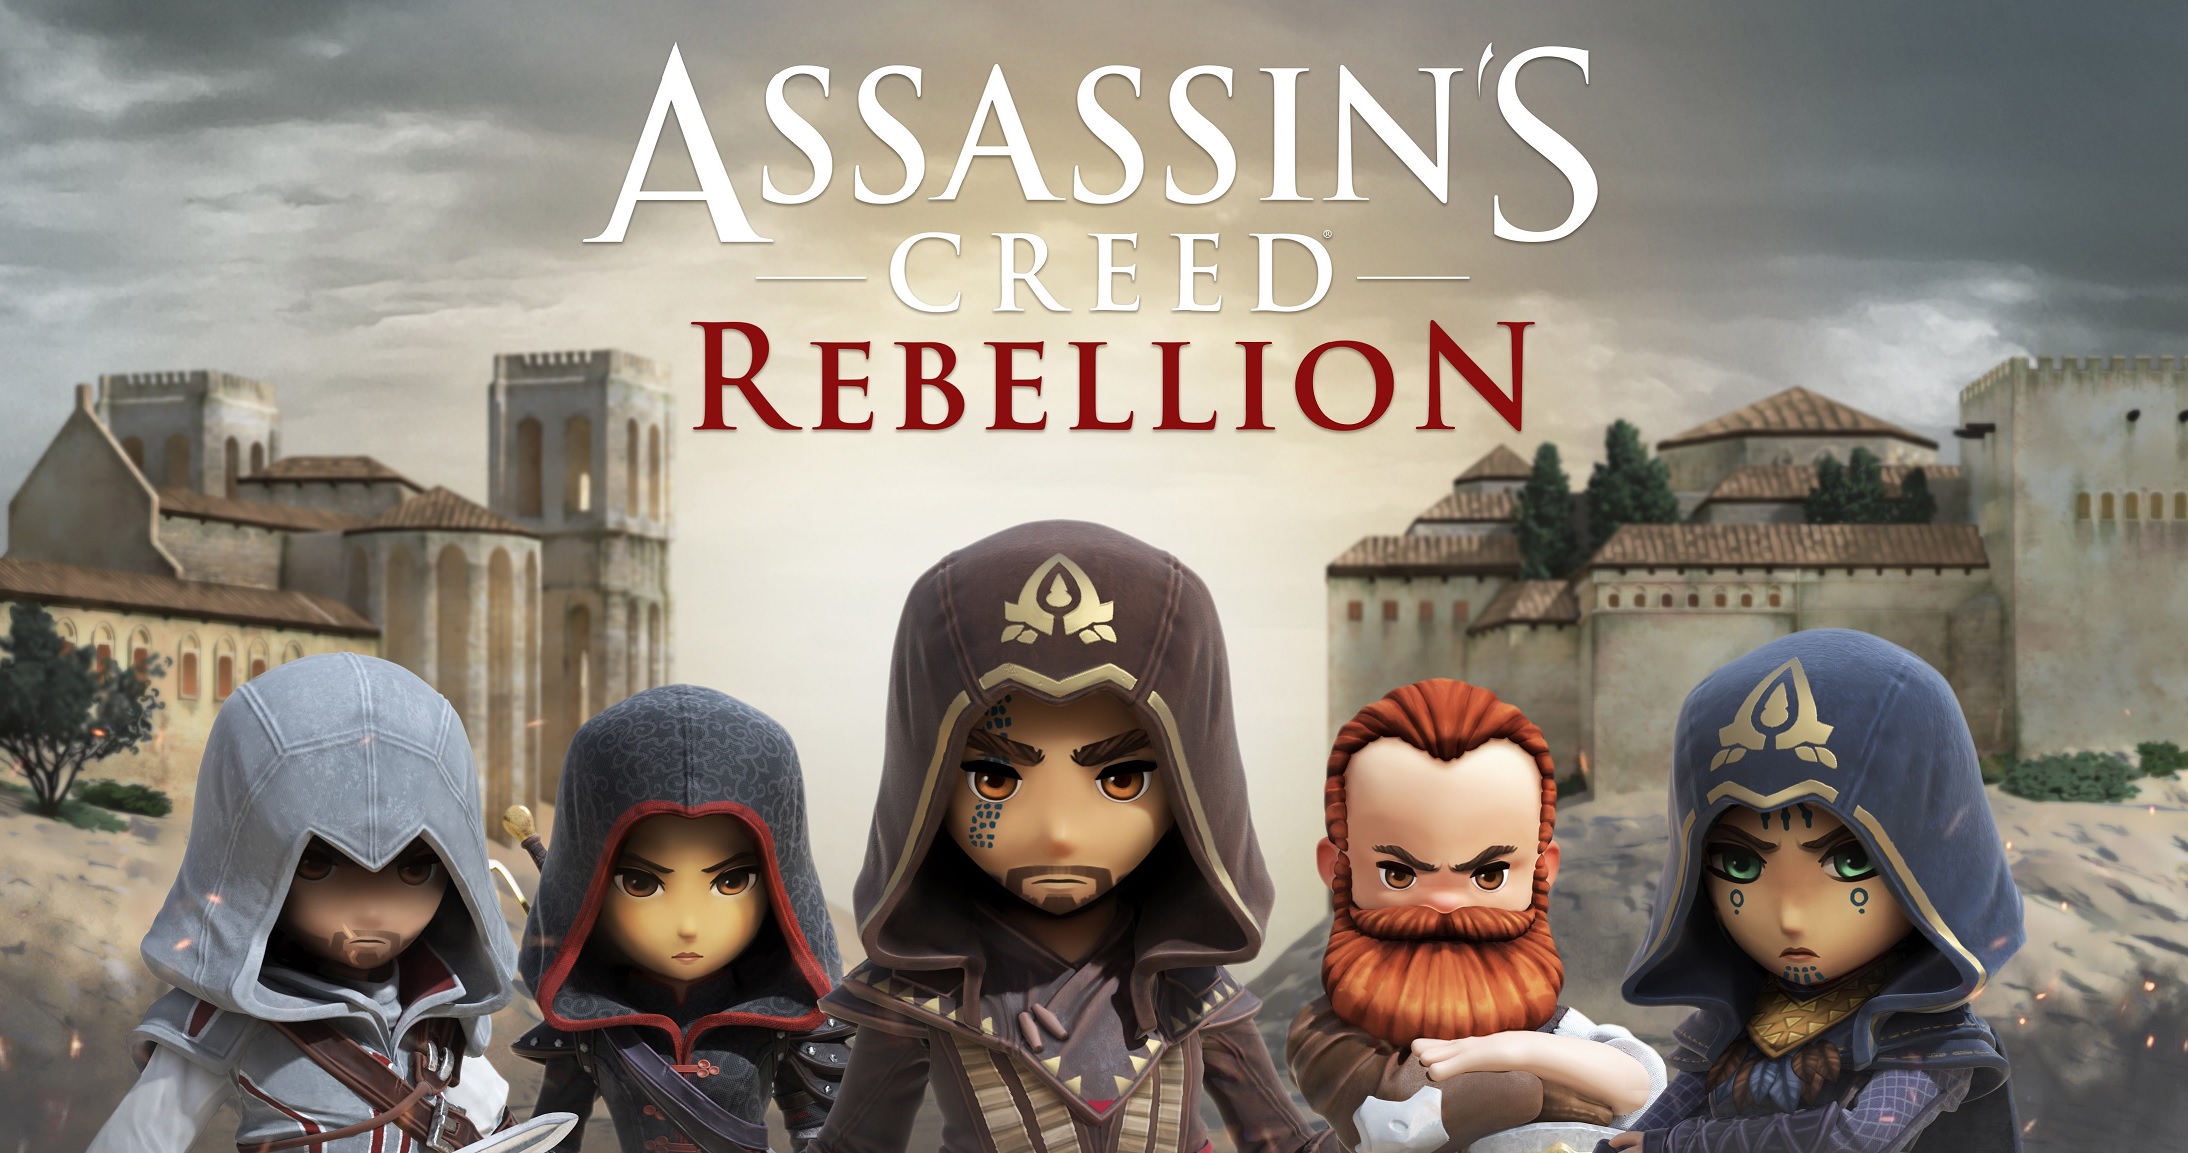 Assassin's Creed Rebellion Mobile Game Announced